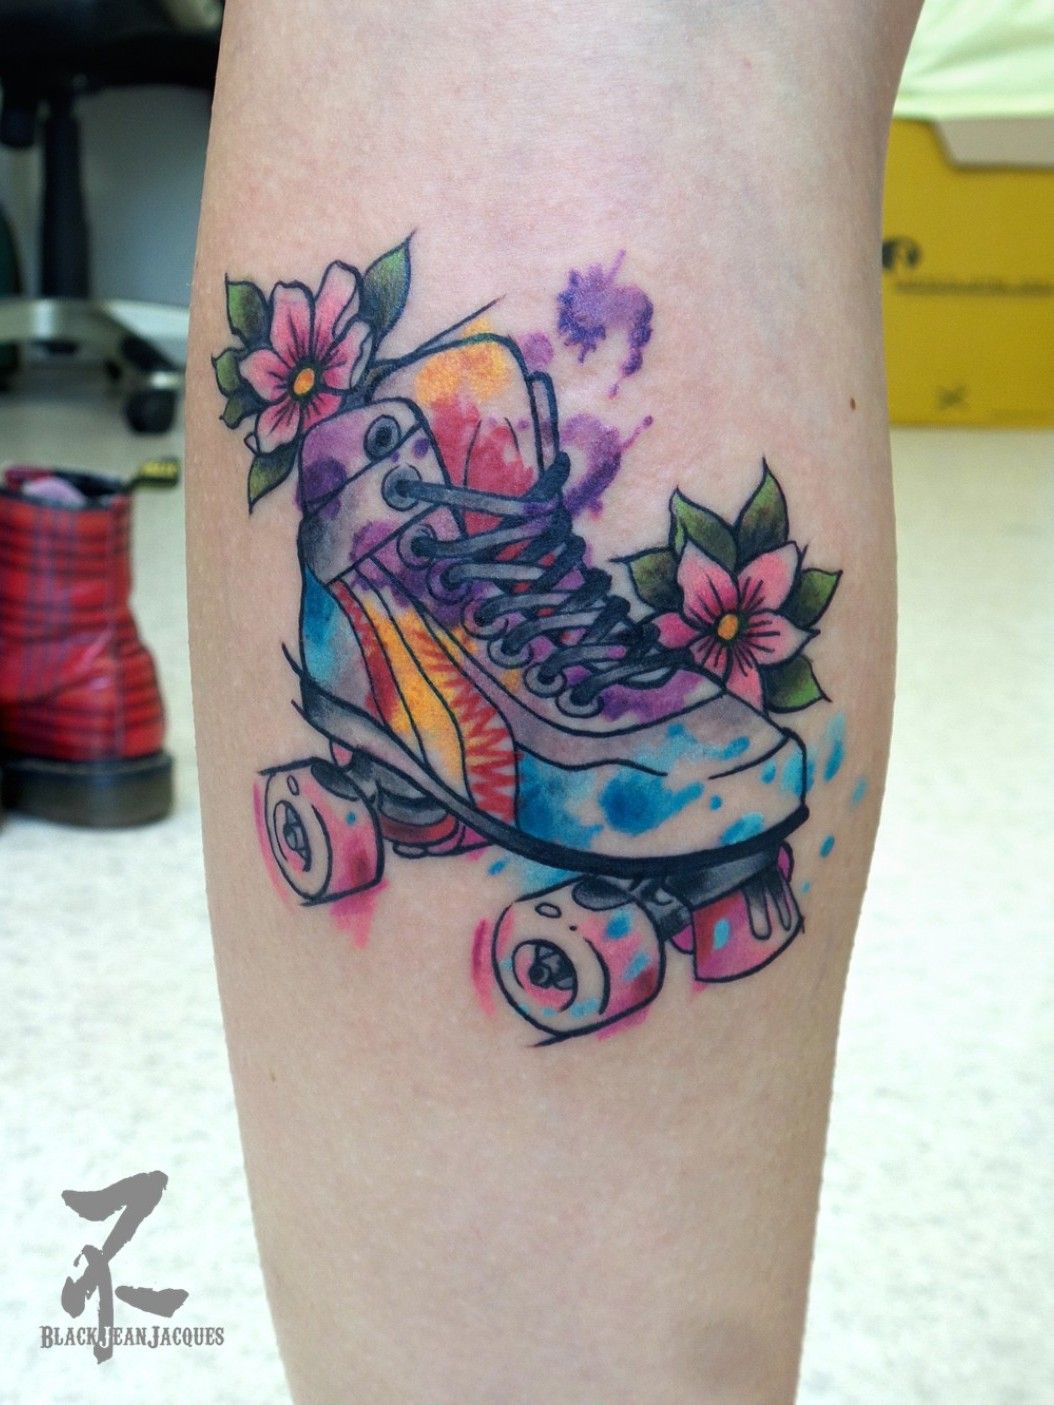 Neck Deep Tattoo  Heart with Roller skates and Rose calf tattoo done  for a roller derby girl from Pacific Roller Deby by Mike  instagramcomtattoohandsome Wanna tattoo whacha want Mike can create